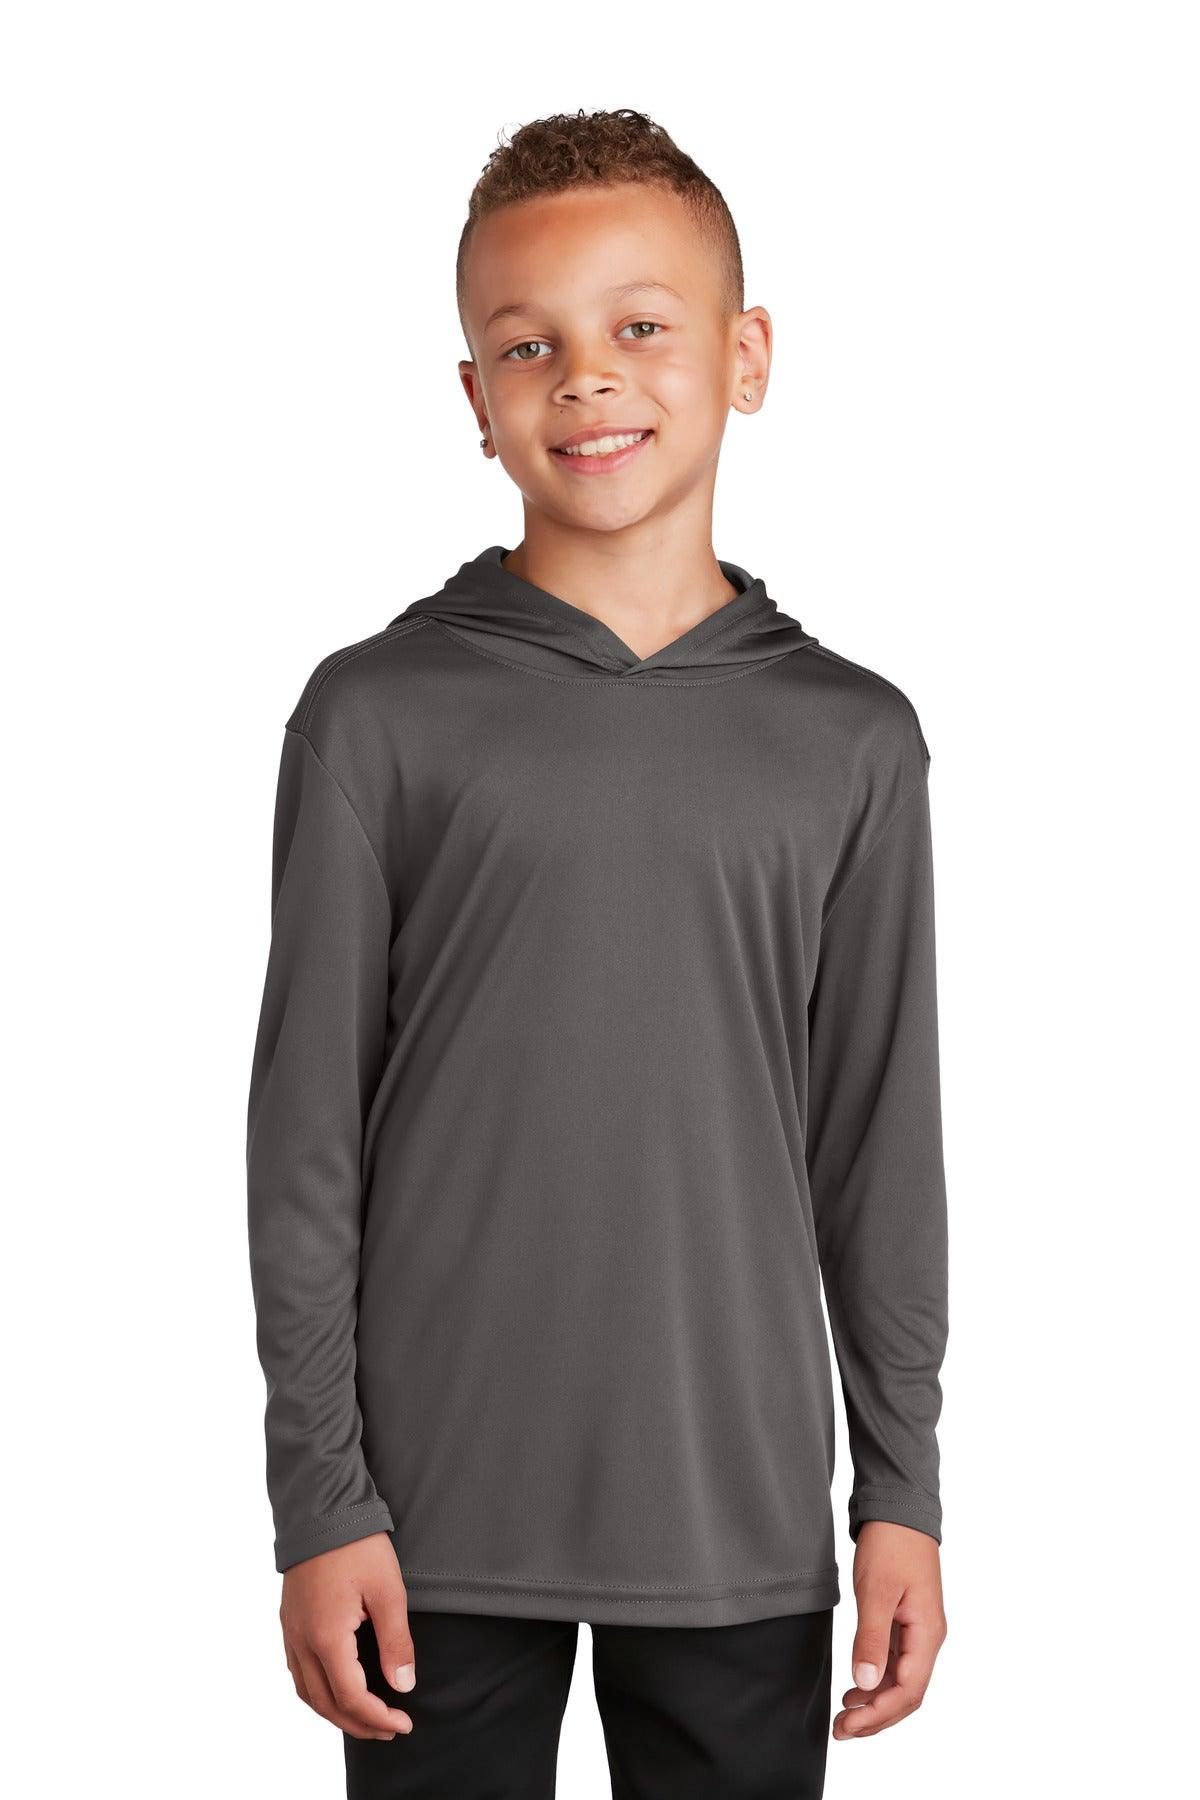 Sport-Tek Youth PosiCharge Competitor Hooded Pullover. YST358 - Dresses Max